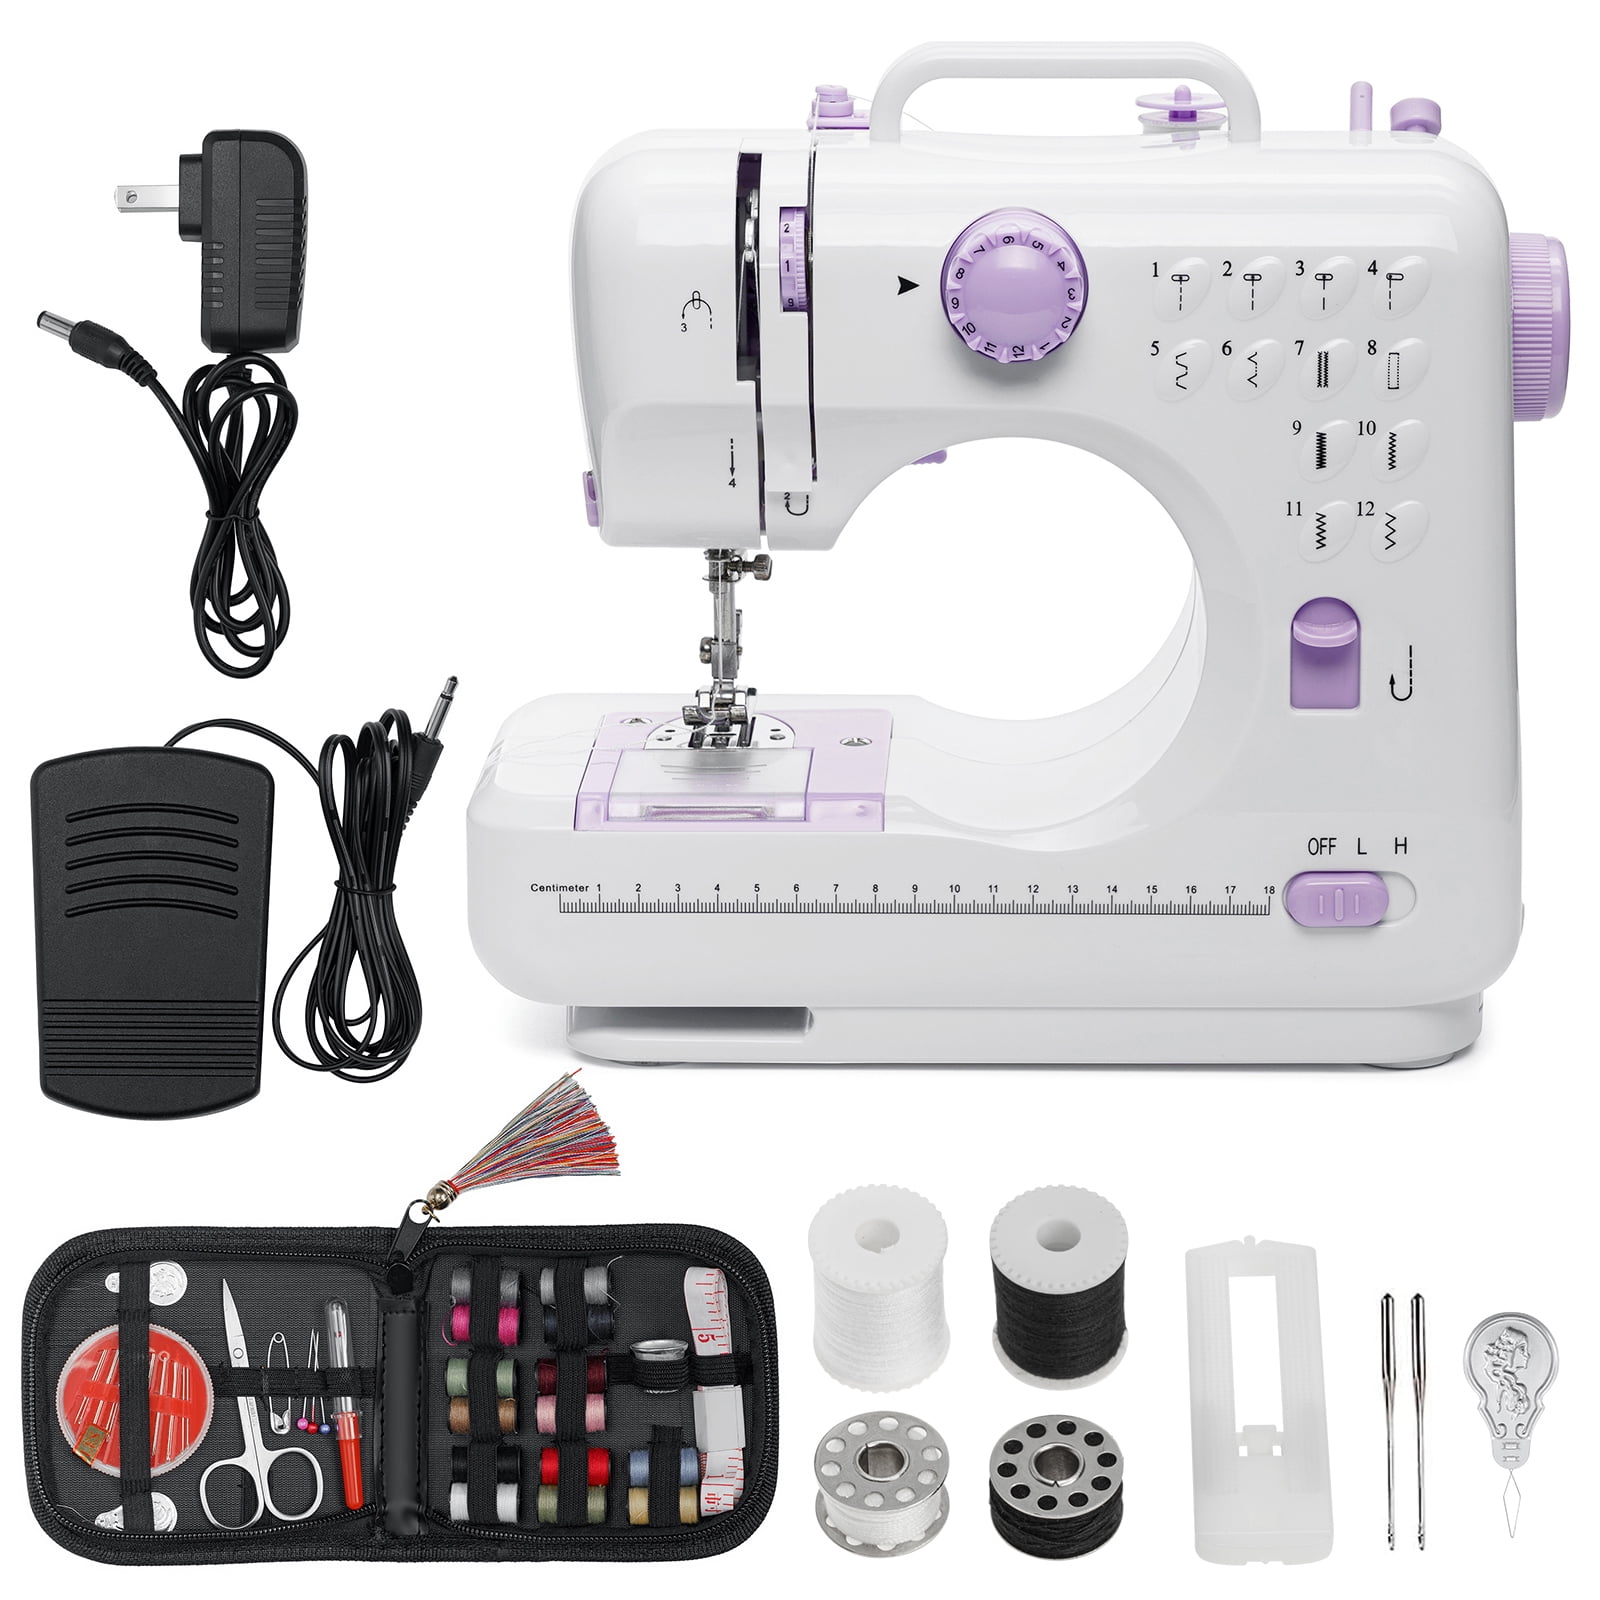 4 Best Singer Kids' Sewing Machines - Learn To Sew!